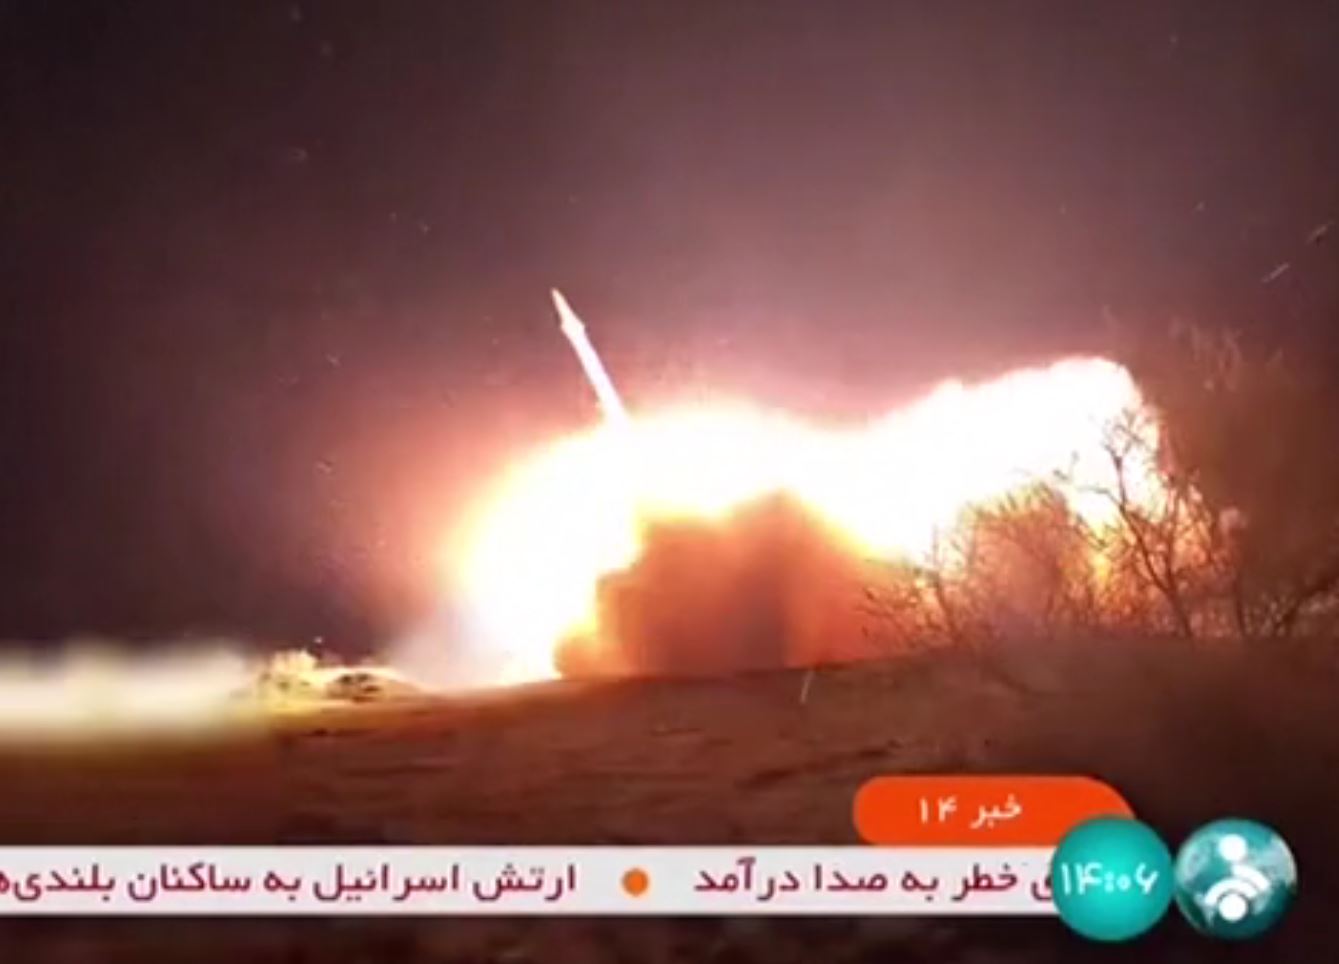 The moment Iran began its 300-missile attack on Israel was revealed by Iranian state television